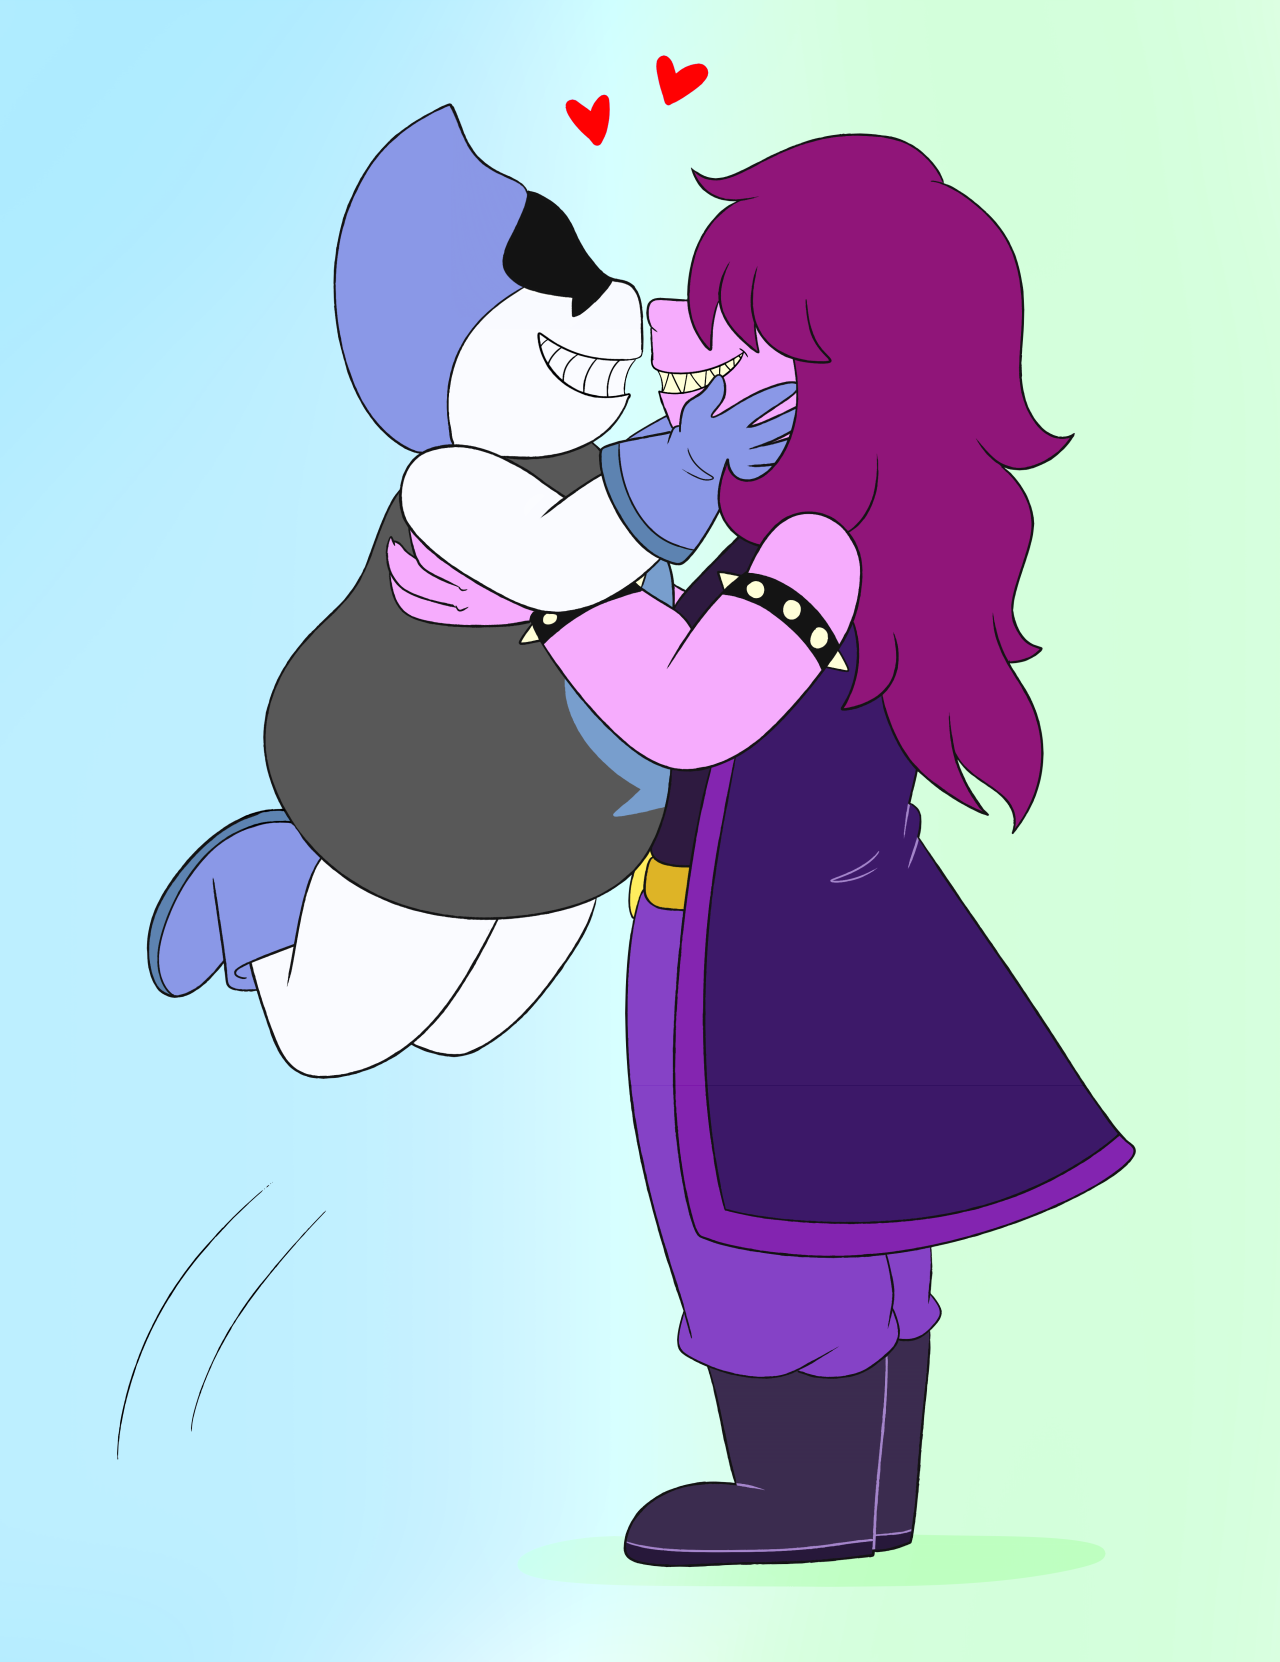 Susie X lancer for life!! 